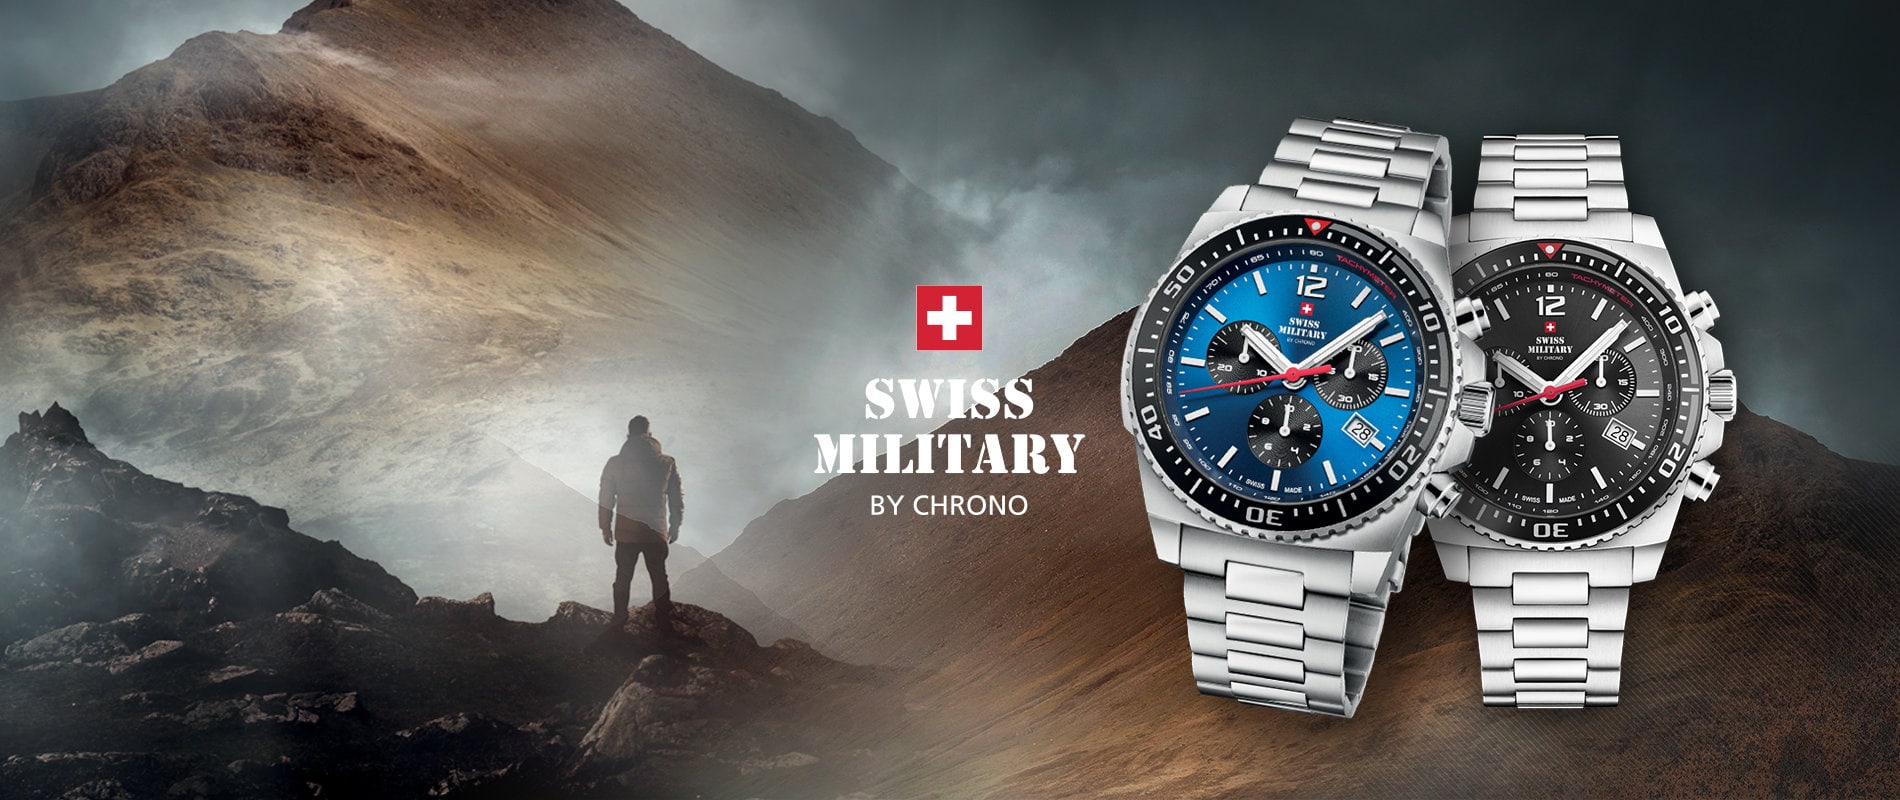 SWISS MILITARY BY CHRONO AUTOMATIC SPECIAL EDITION  TWO TONE STAINLESS STEEL BRACELET